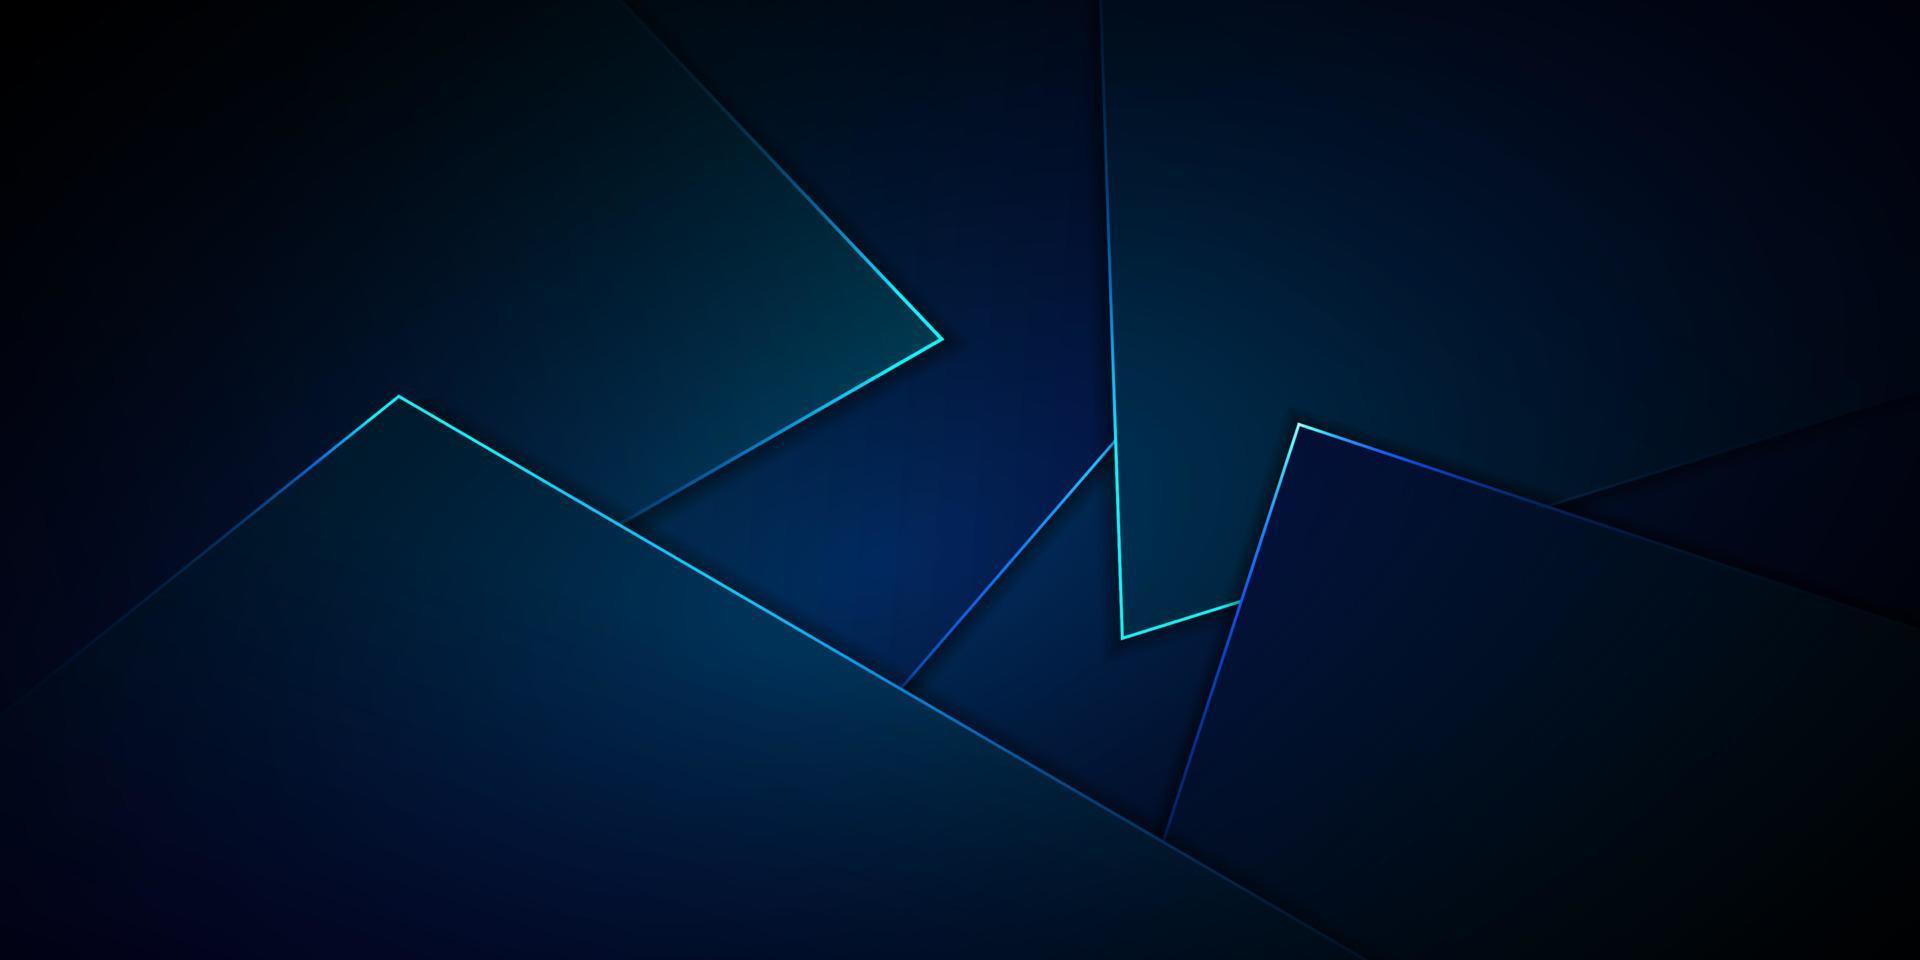 bstract blue background image. glowing square corner, vector illustration